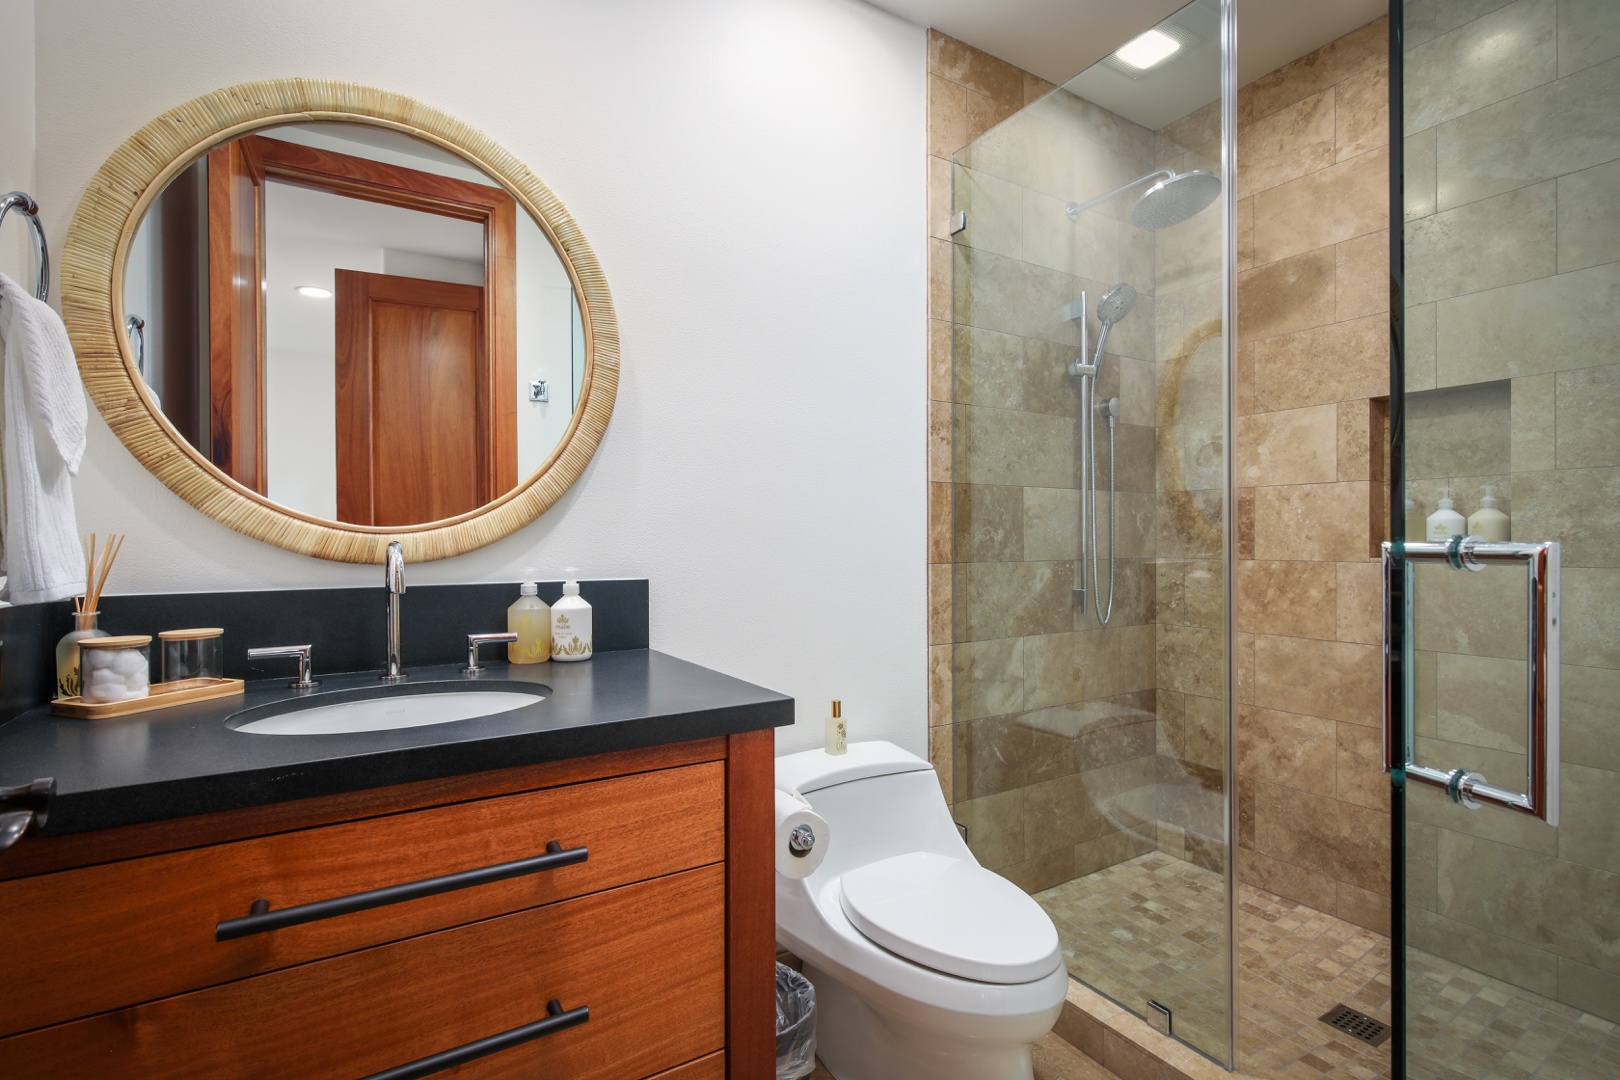 Kailua Kona Vacation Rentals, 4BD Pakui Street (147) Estate Home at Four Seasons Resort at Hualalai - Guest Suite #2’s en suite bath with glass enclosed shower.